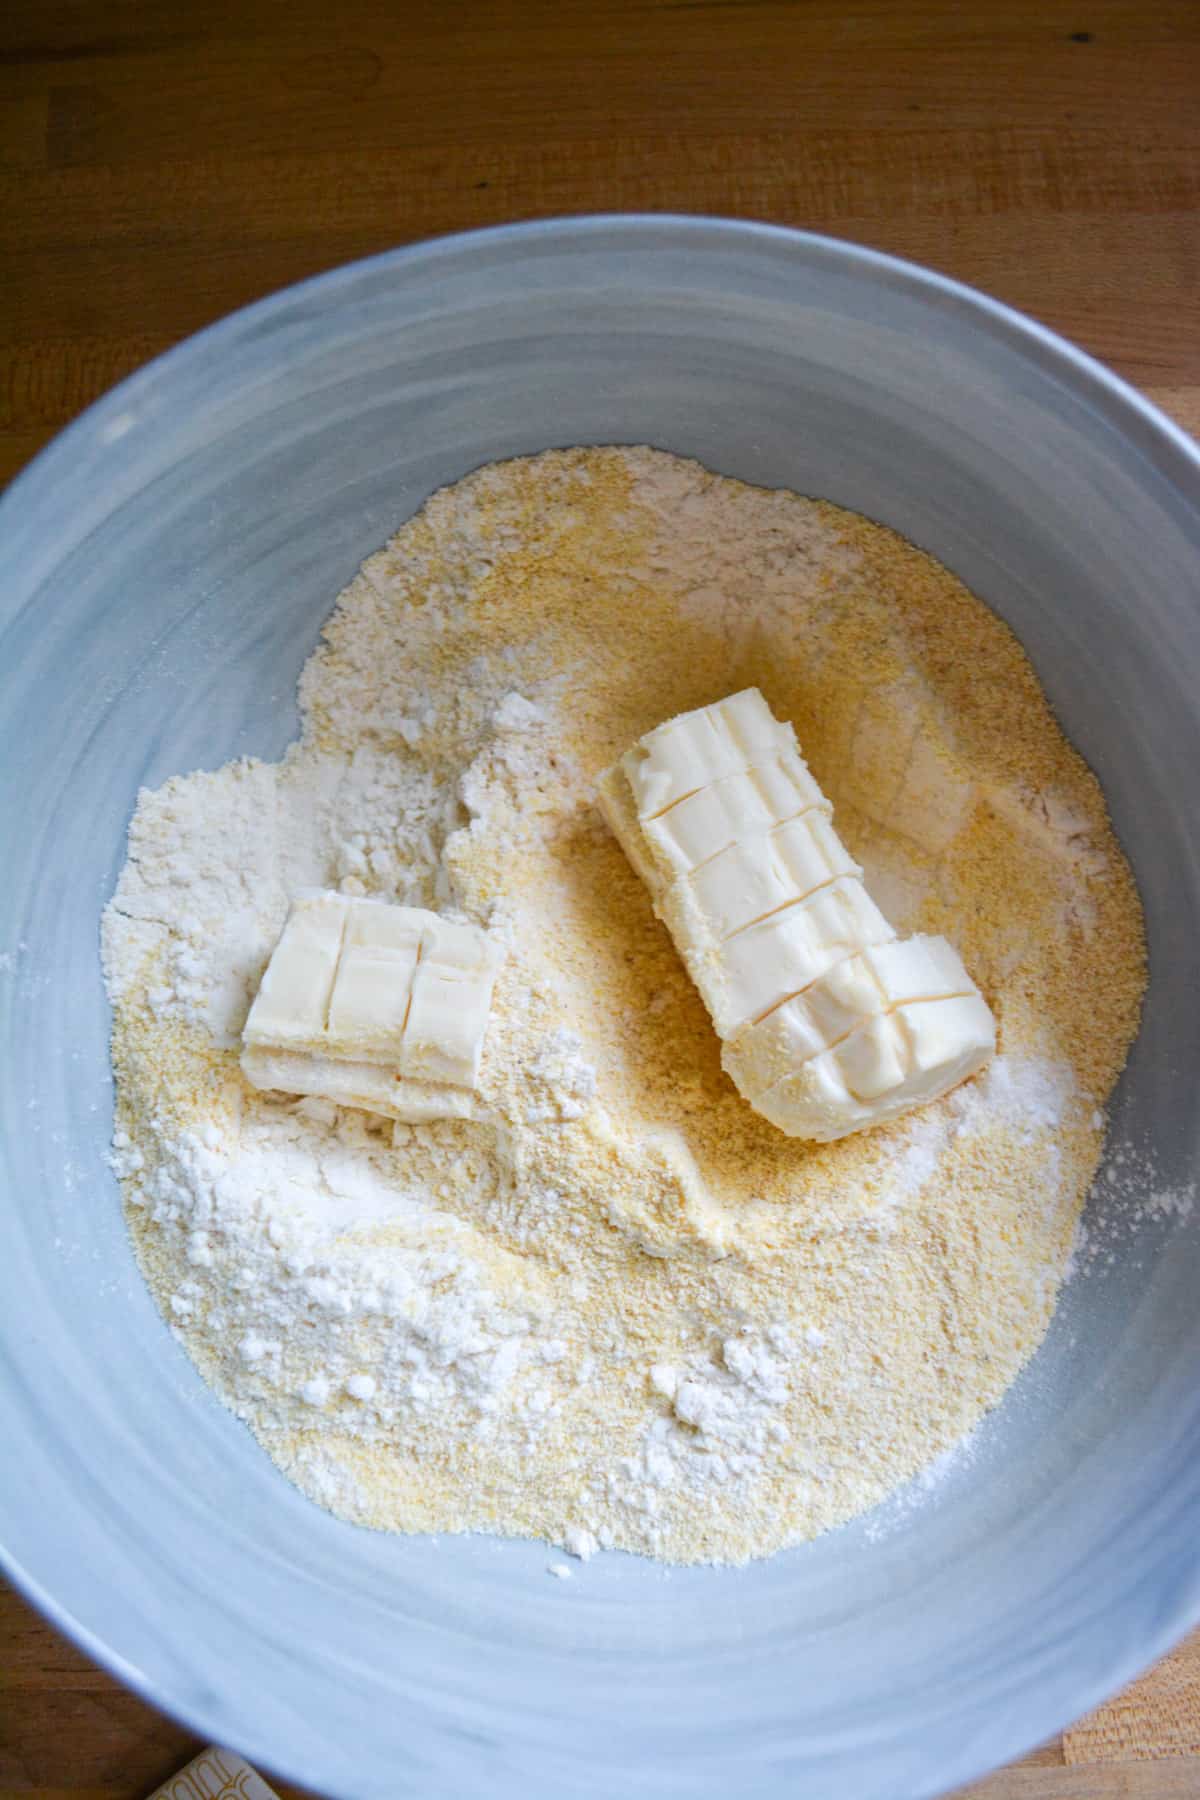 Dry ingredients and cubed butter in a large mixing bowl.